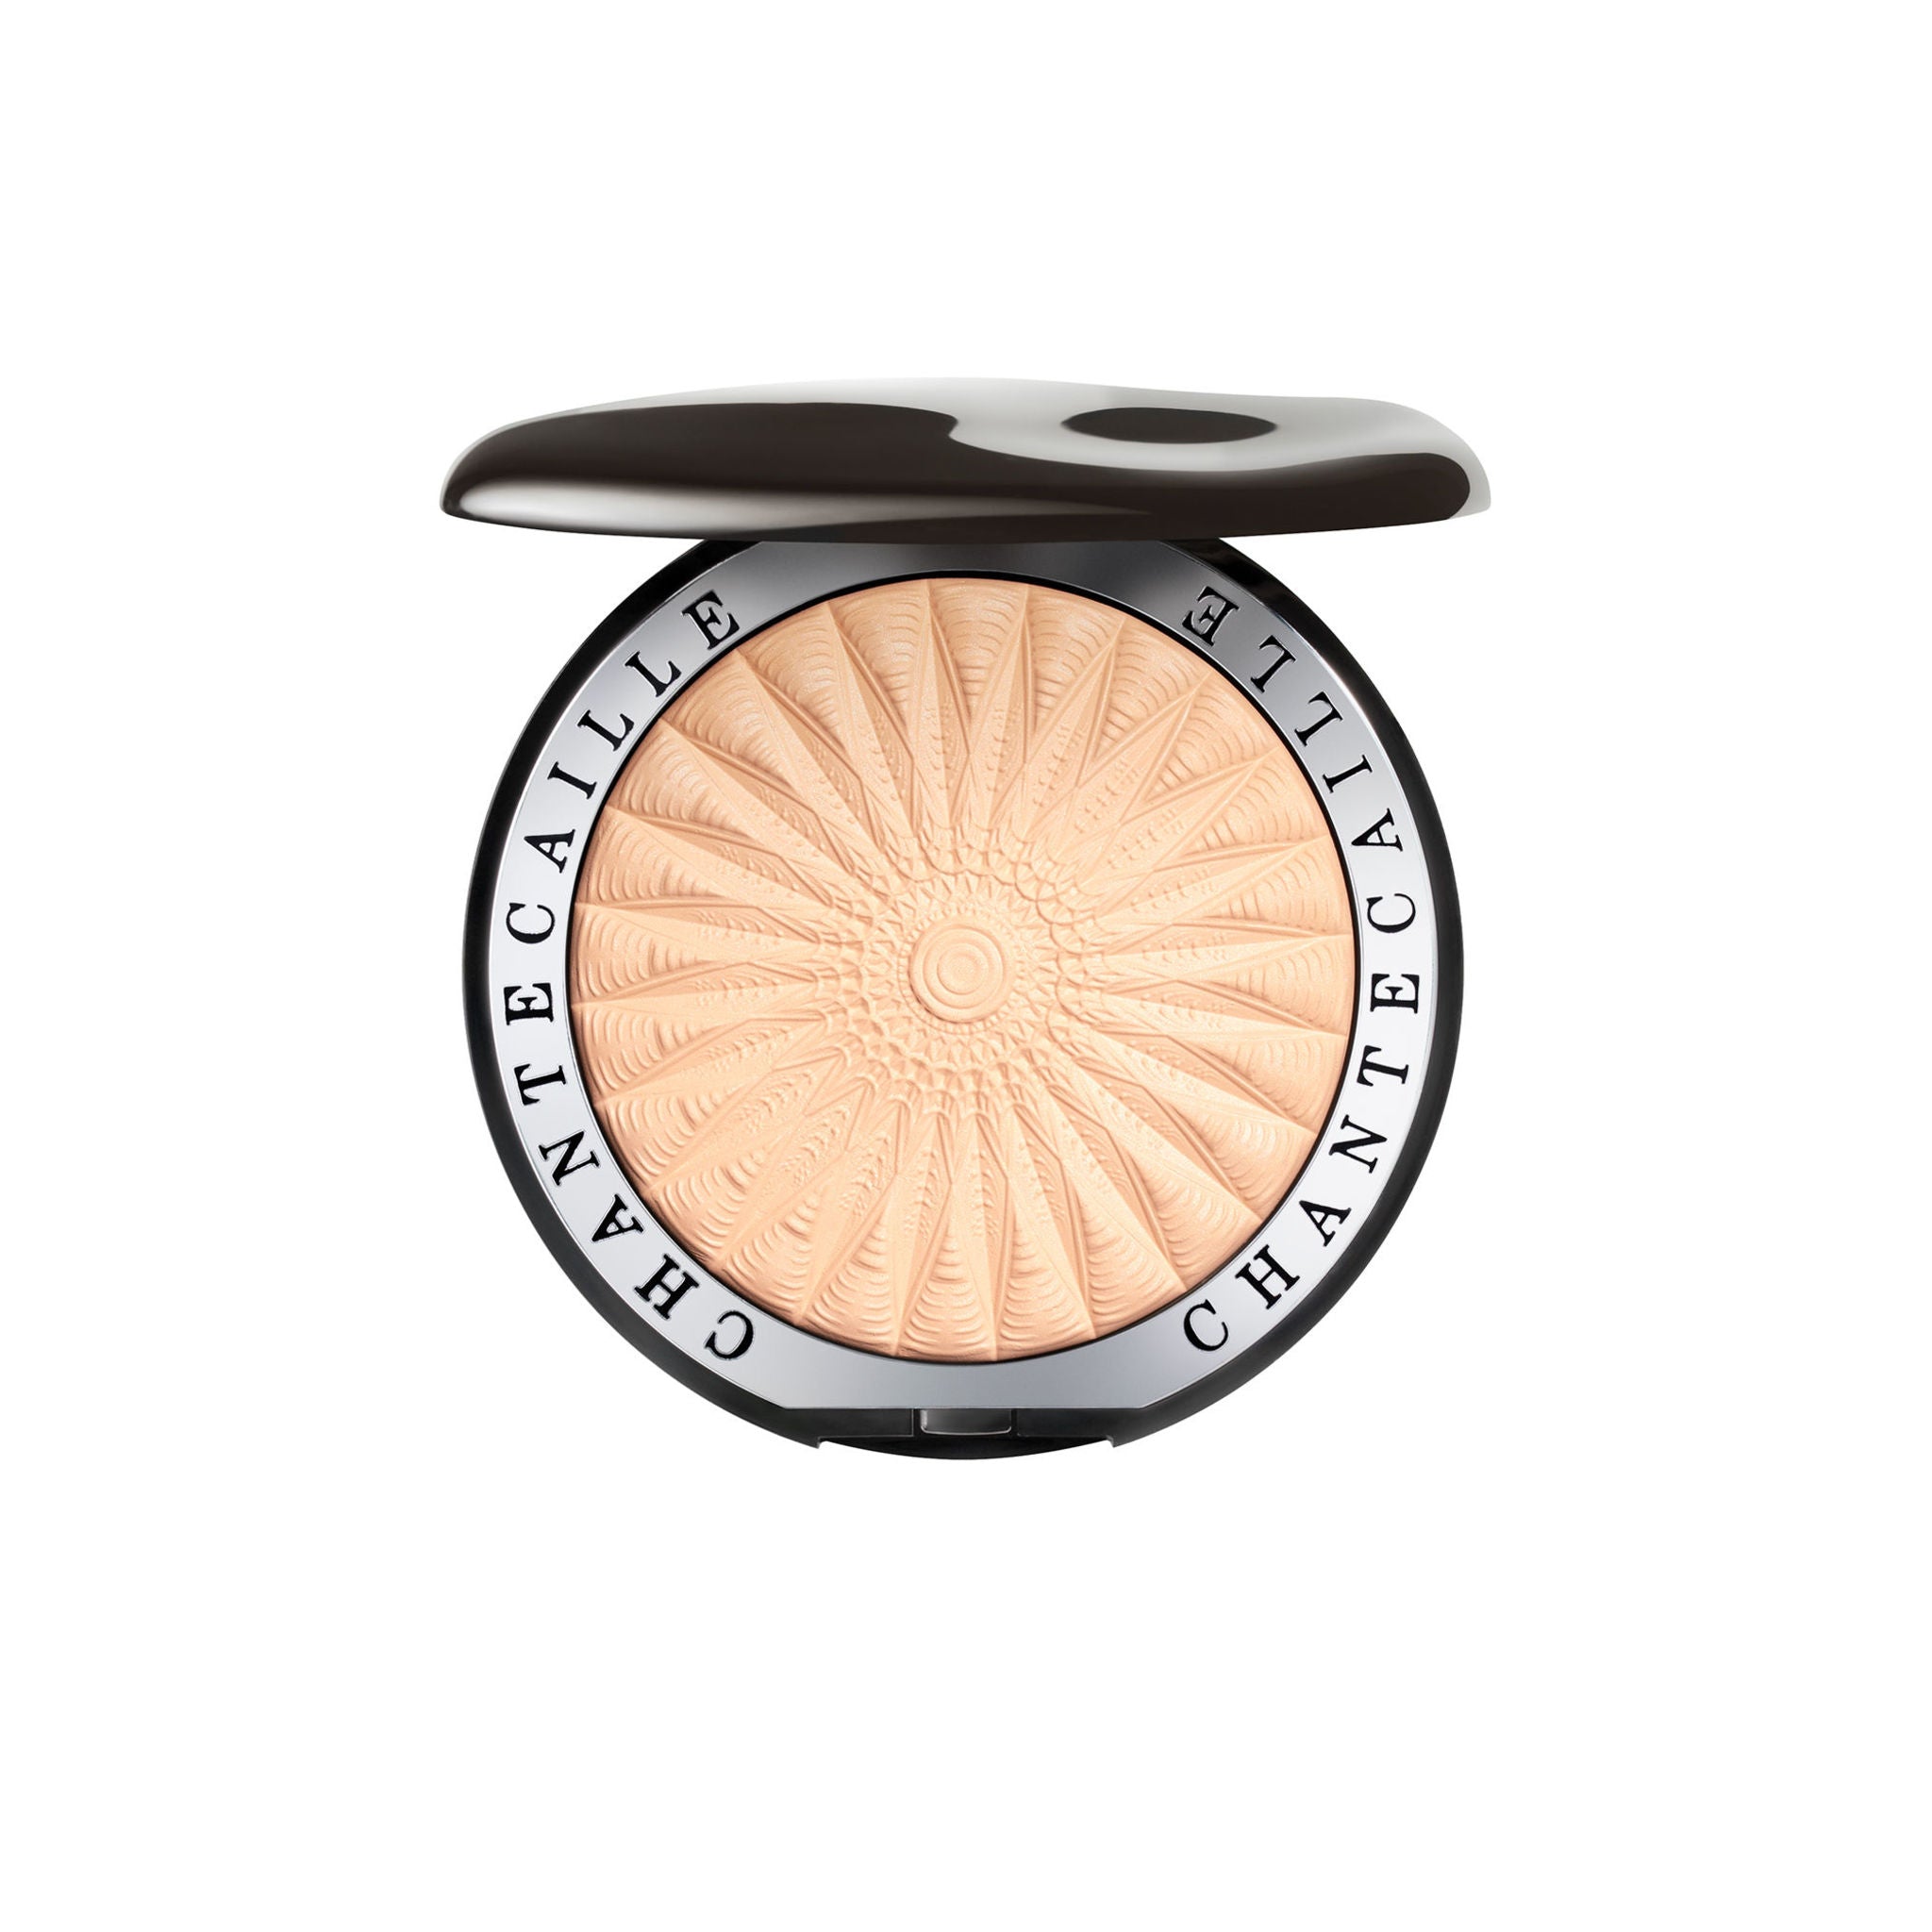 Chantecaille Perfect Blur Finishing Powder Light/Medium main image. This product is in the color nude, for light and medium complexions